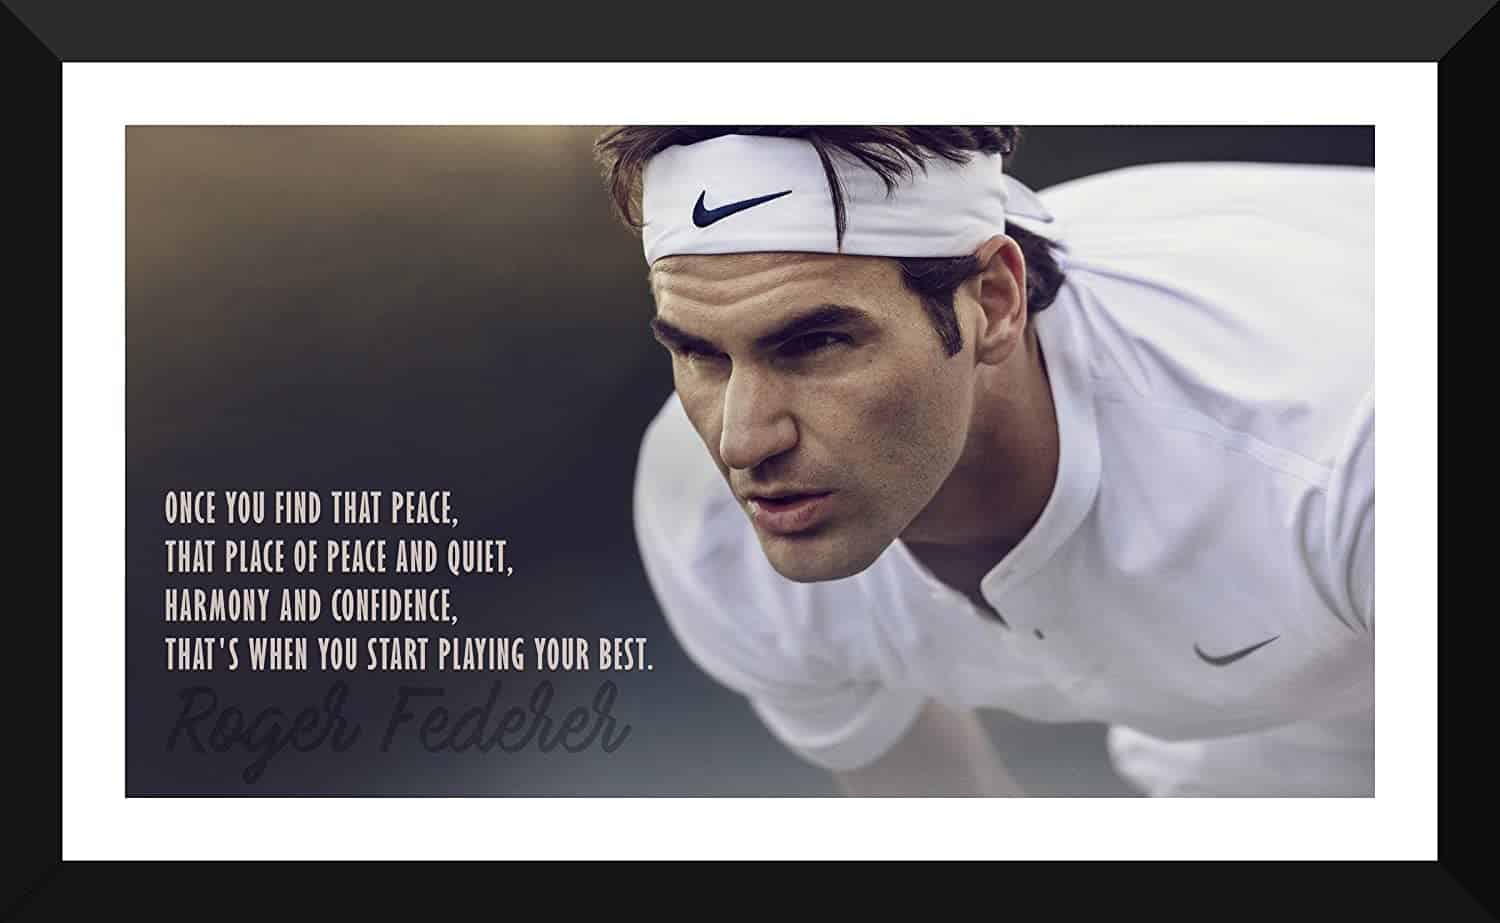 Roger Federer quote on peace